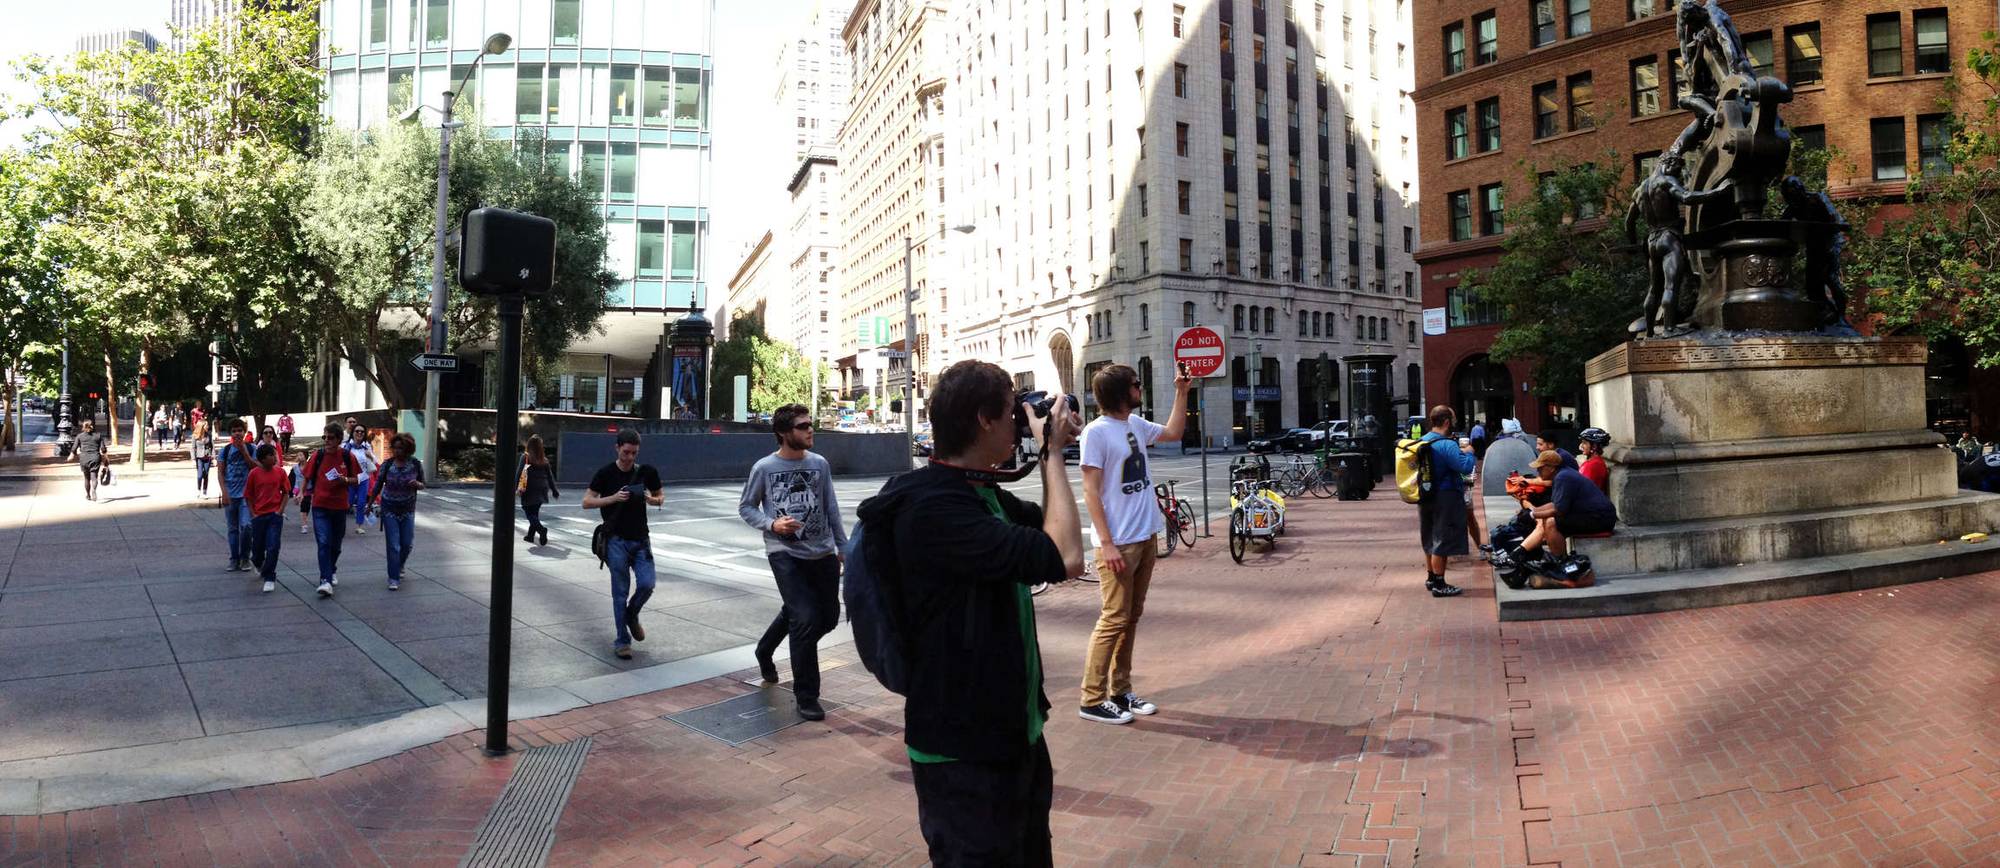 Panorama of the group taking a photo of a statue